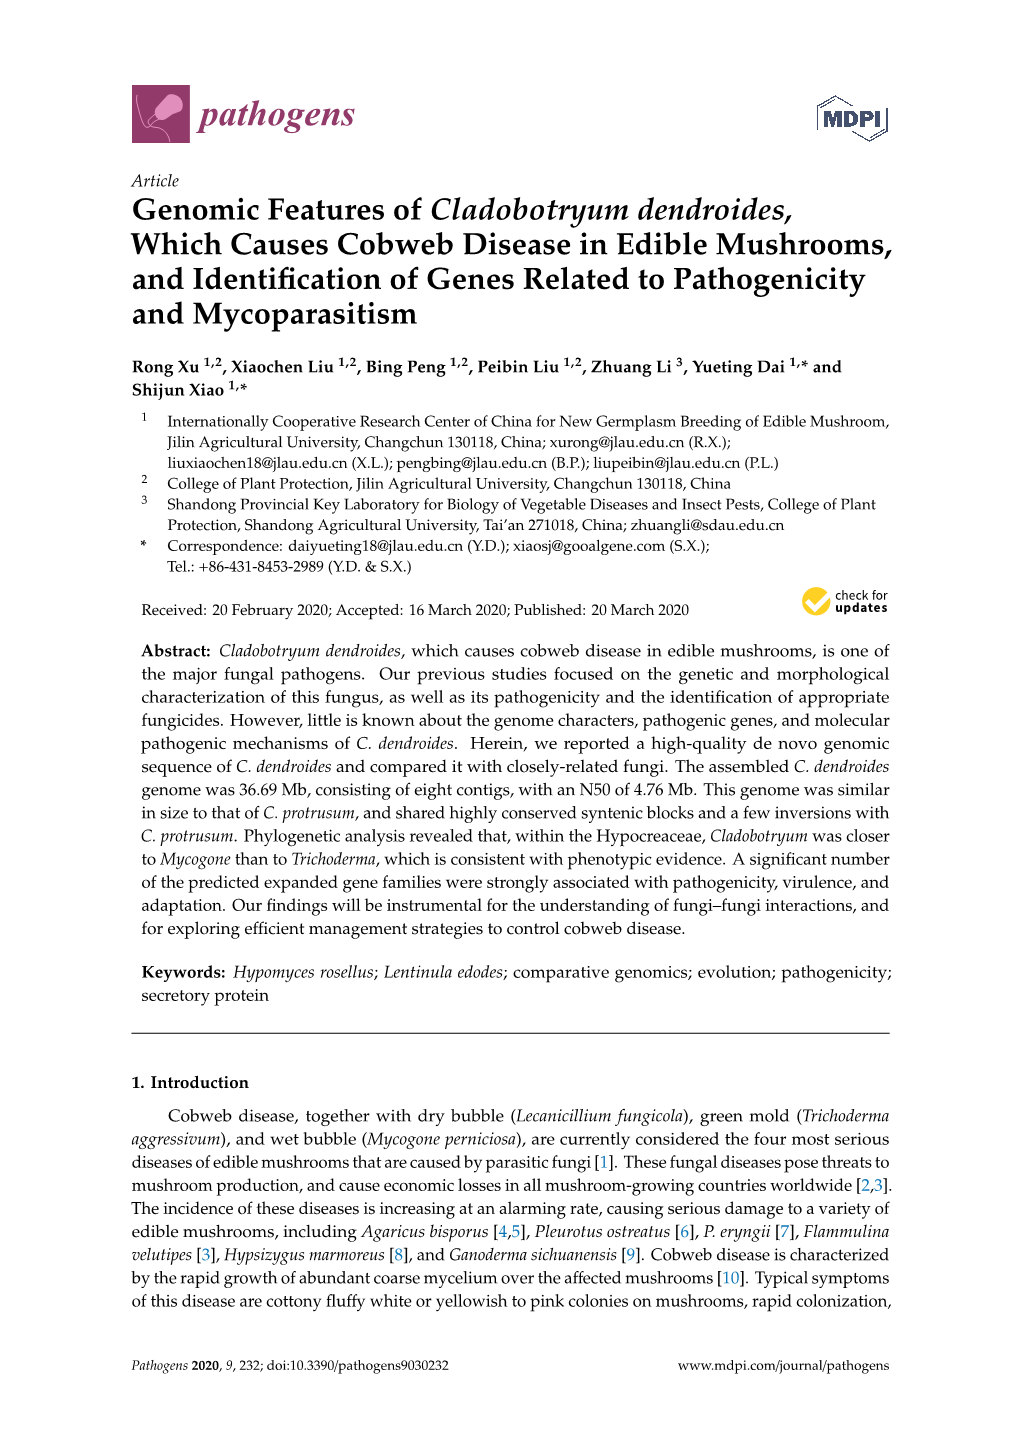 Genomic Features of Cladobotryum Dendroides, Which Causes Cobweb Disease in Edible Mushrooms, and Identiﬁcation of Genes Related to Pathogenicity and Mycoparasitism